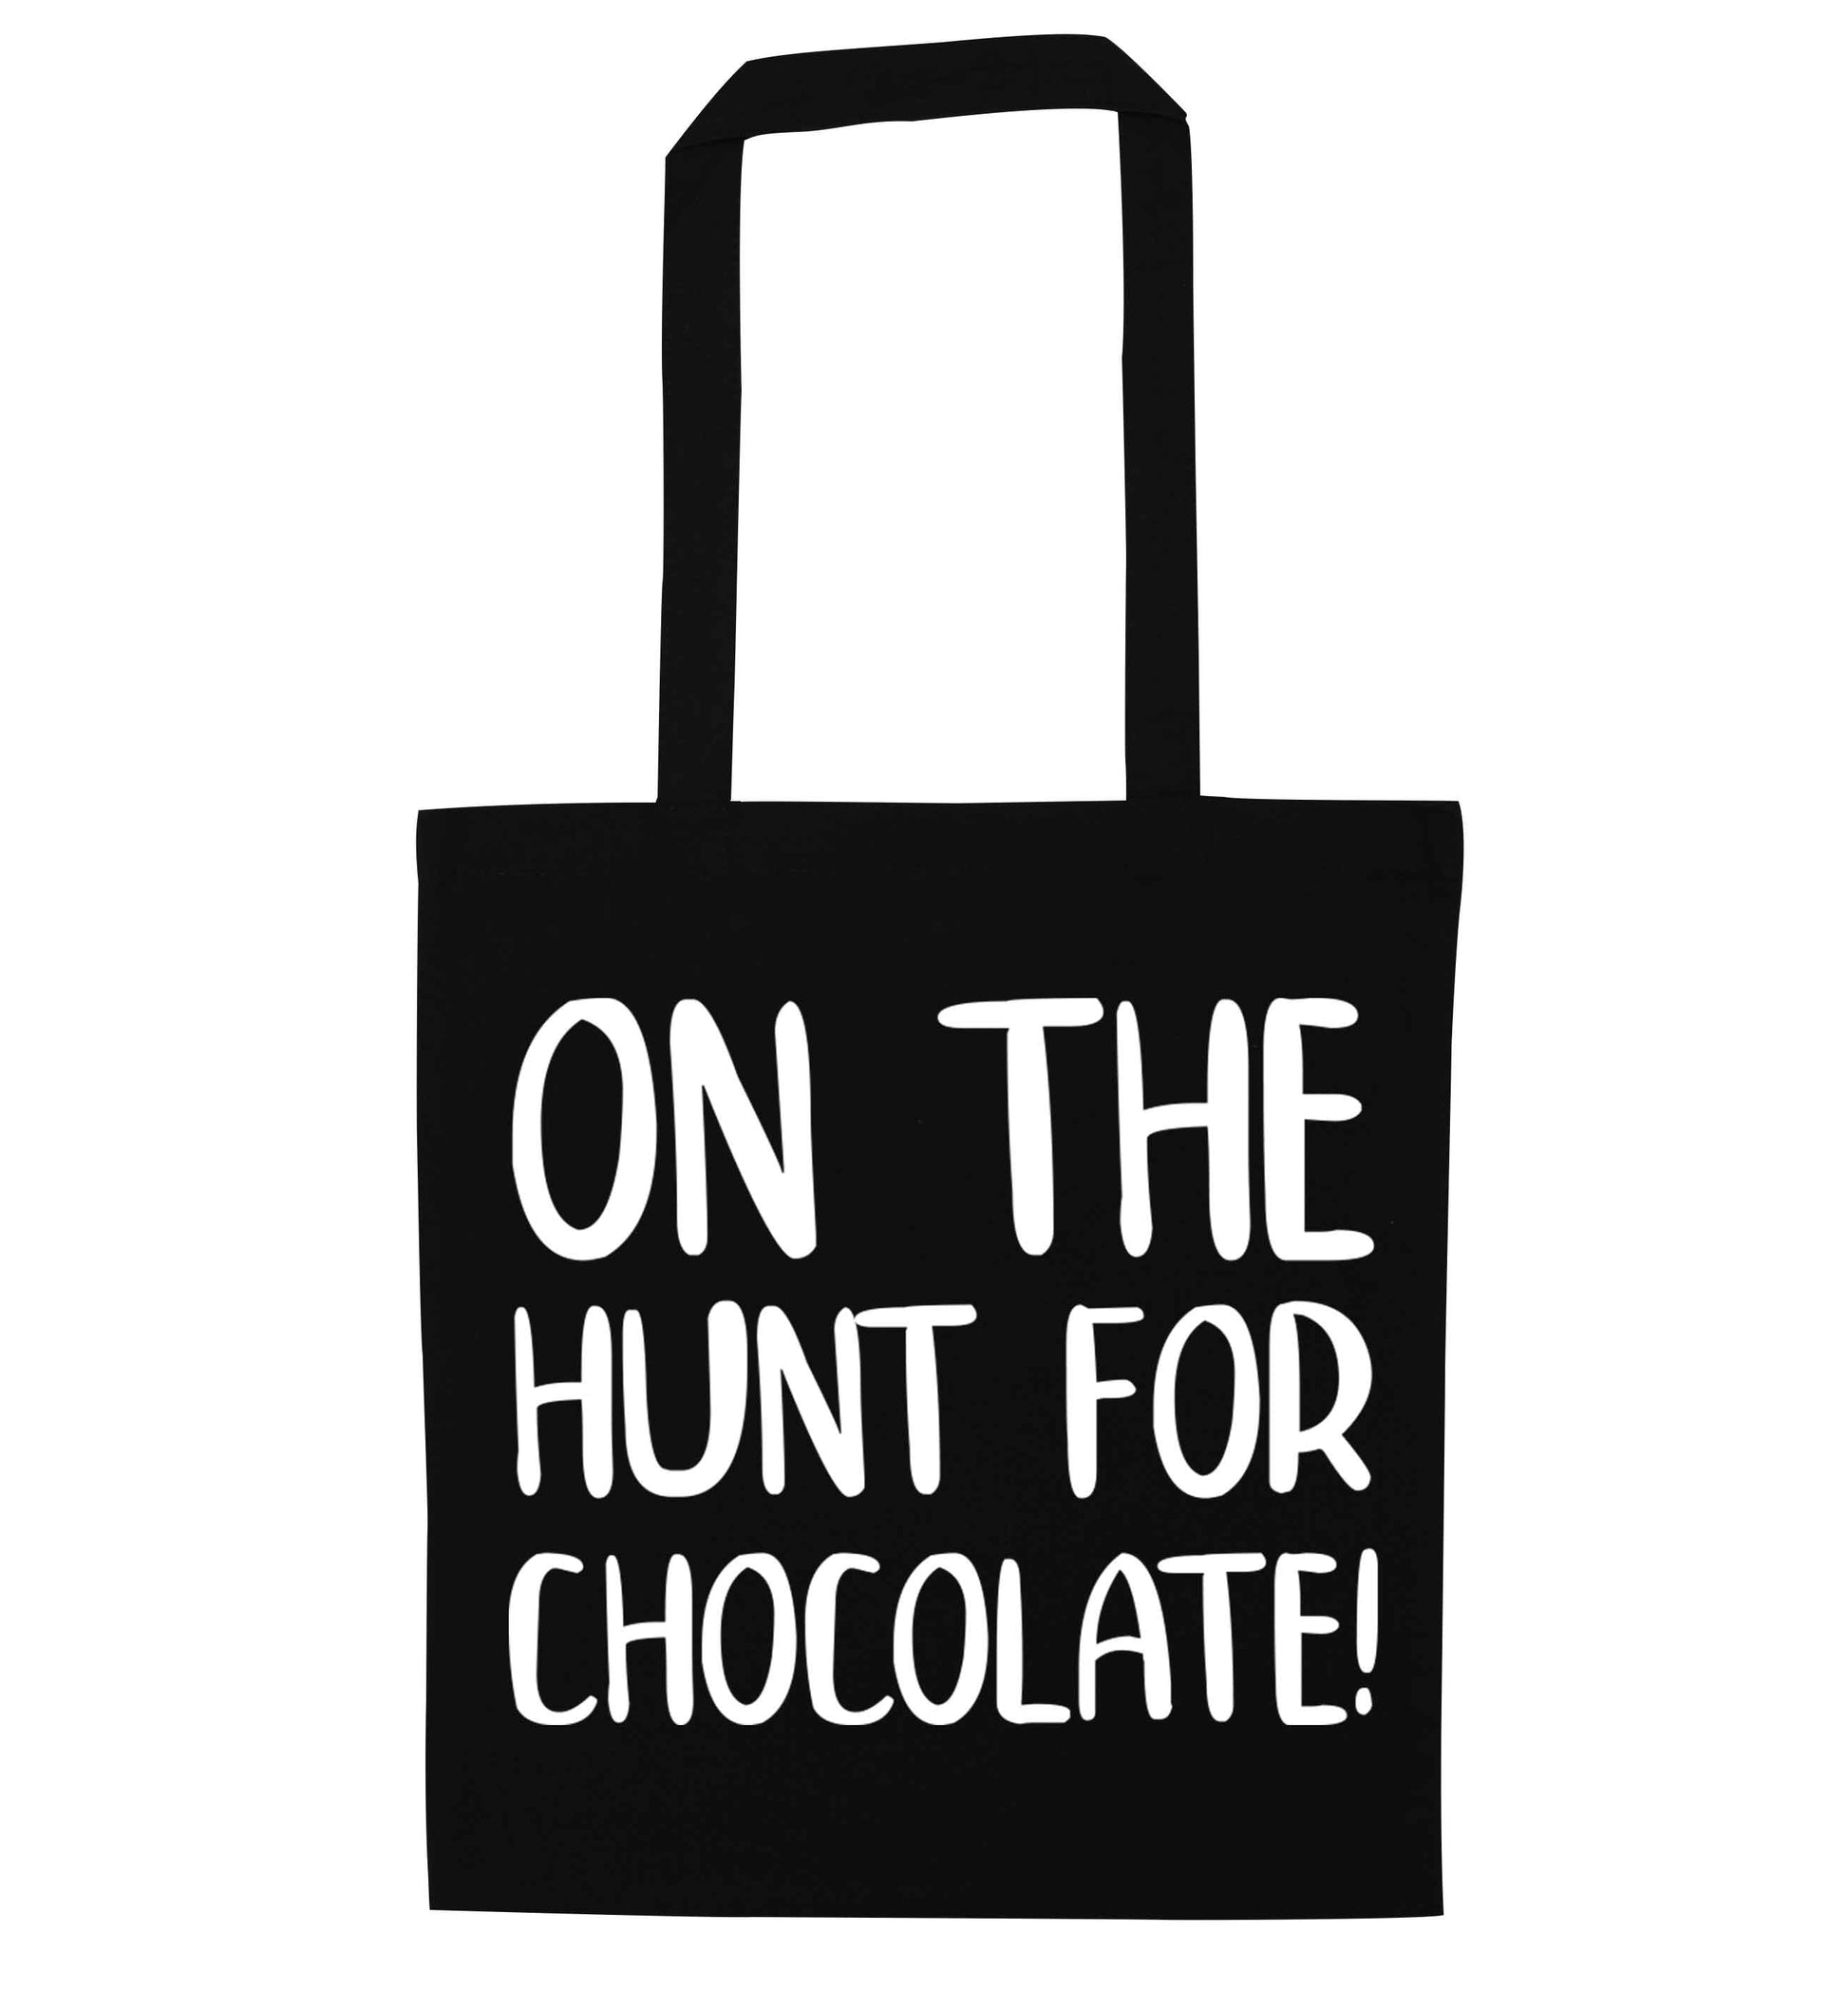 On the hunt for chocolate! black tote bag